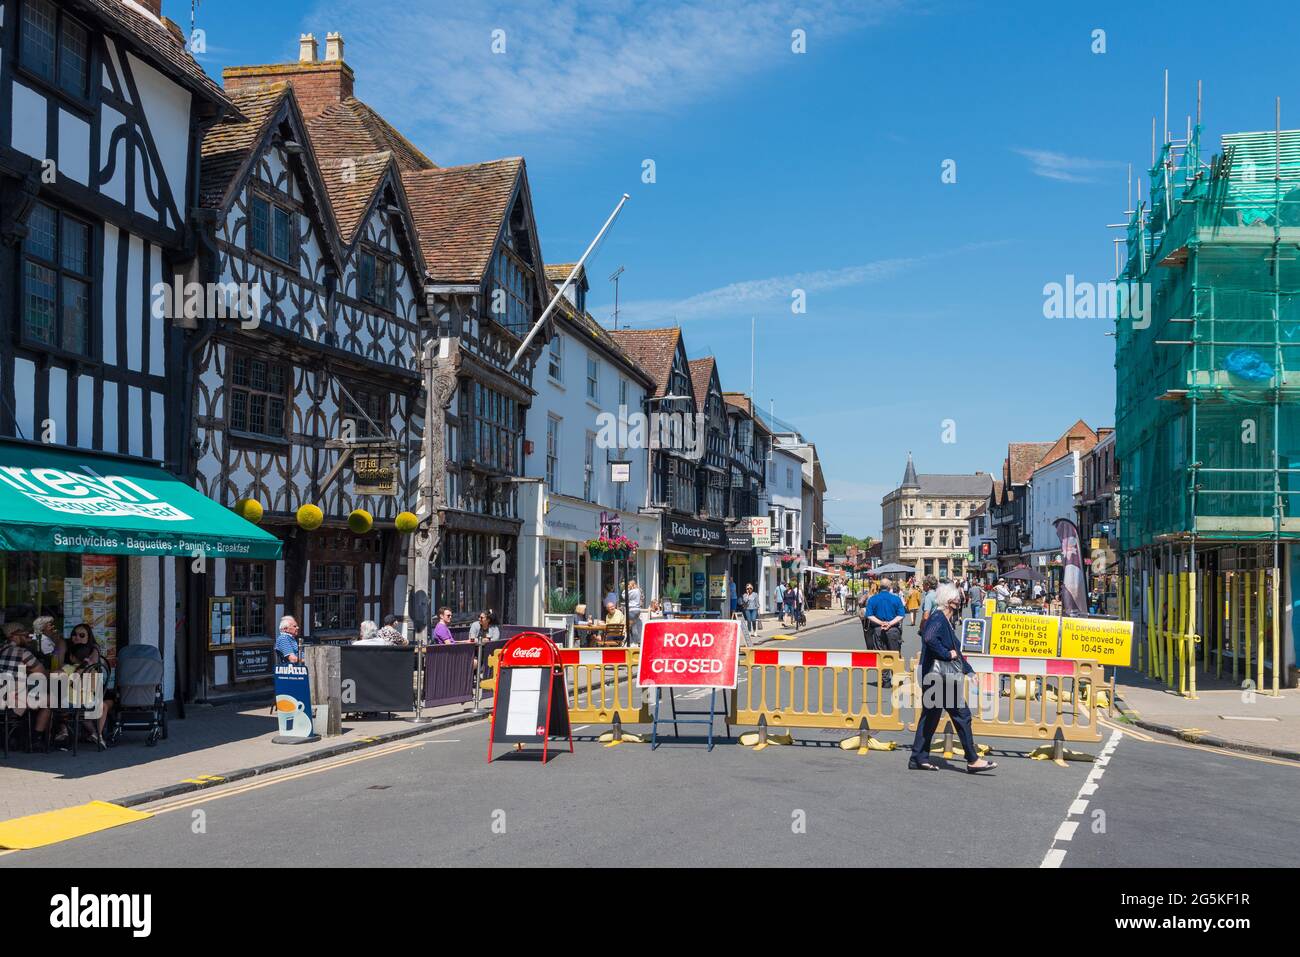 High Street in Stratford-upon-Avon,Warwickshire is closed to traffic for social distancing and outdoor seating areas for cafes and restaurants Stock Photo